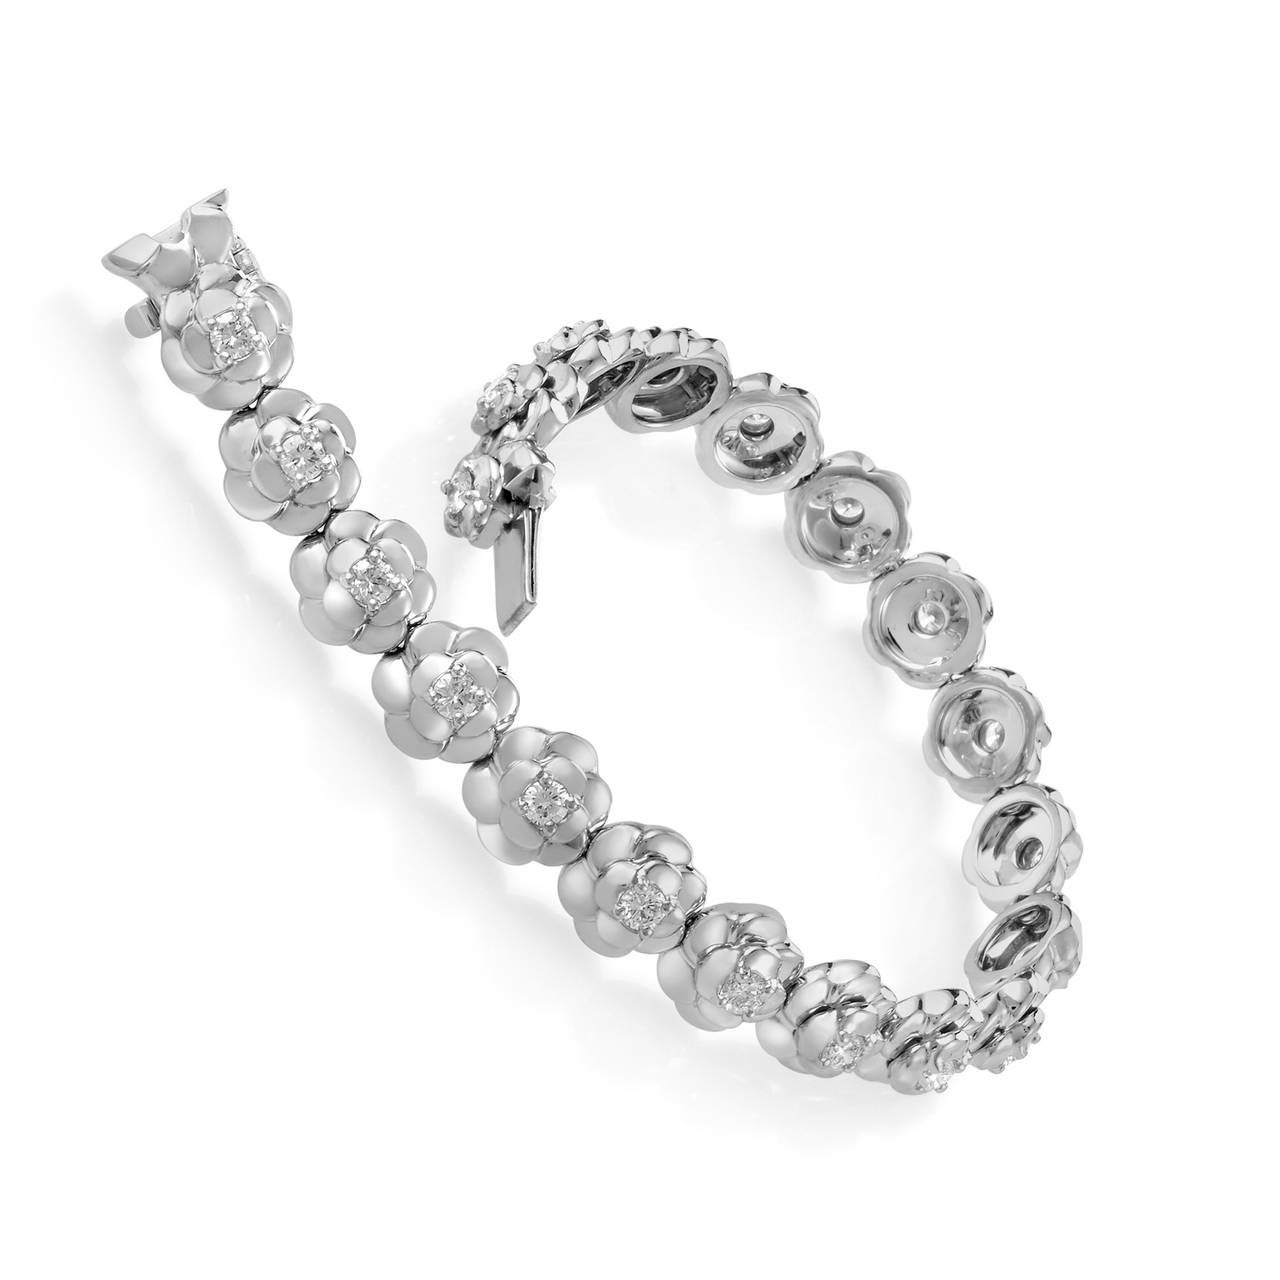 Splendidly graceful and feminine, this gorgeous Chanel bracelet from the extravagant Camélia collection boasts charming floral design lavishly decorated with dazzling diamond stones weighing approximately 2.50 carats in total. The bracelet is made